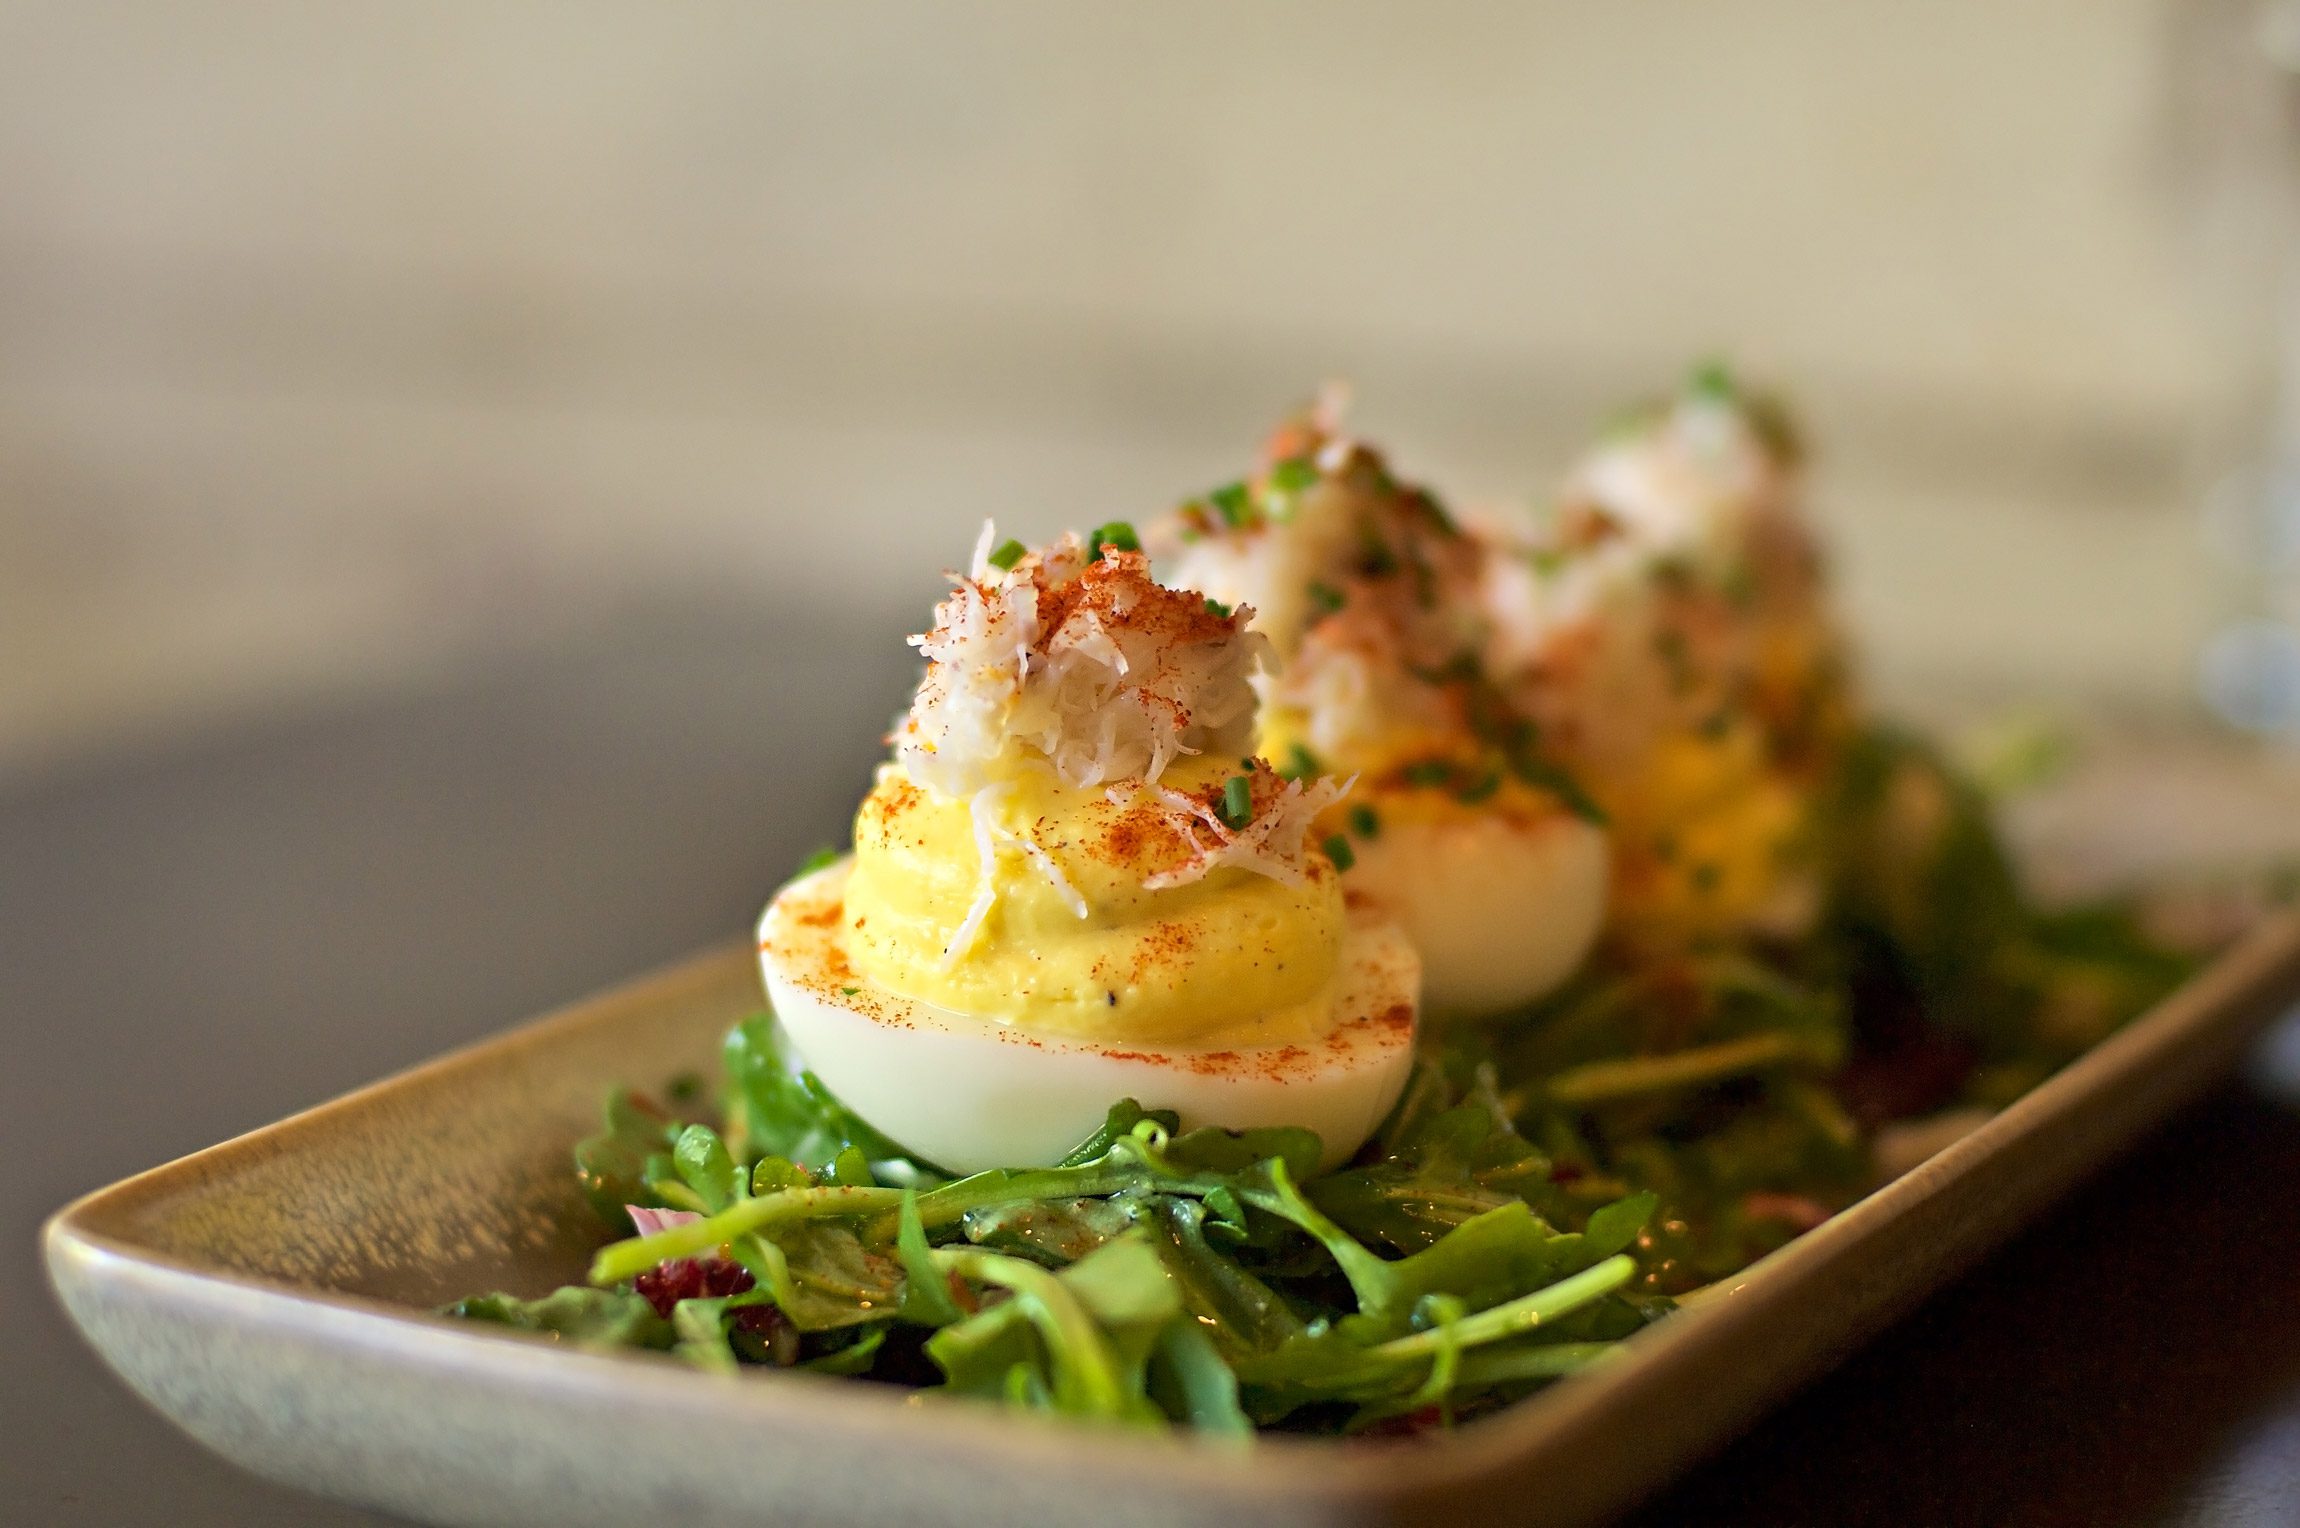 Dungeness-crab-deviled-eggs-at-OSO-restaurant-in-Sonoma-California-photography-by-Monica-Schwartz